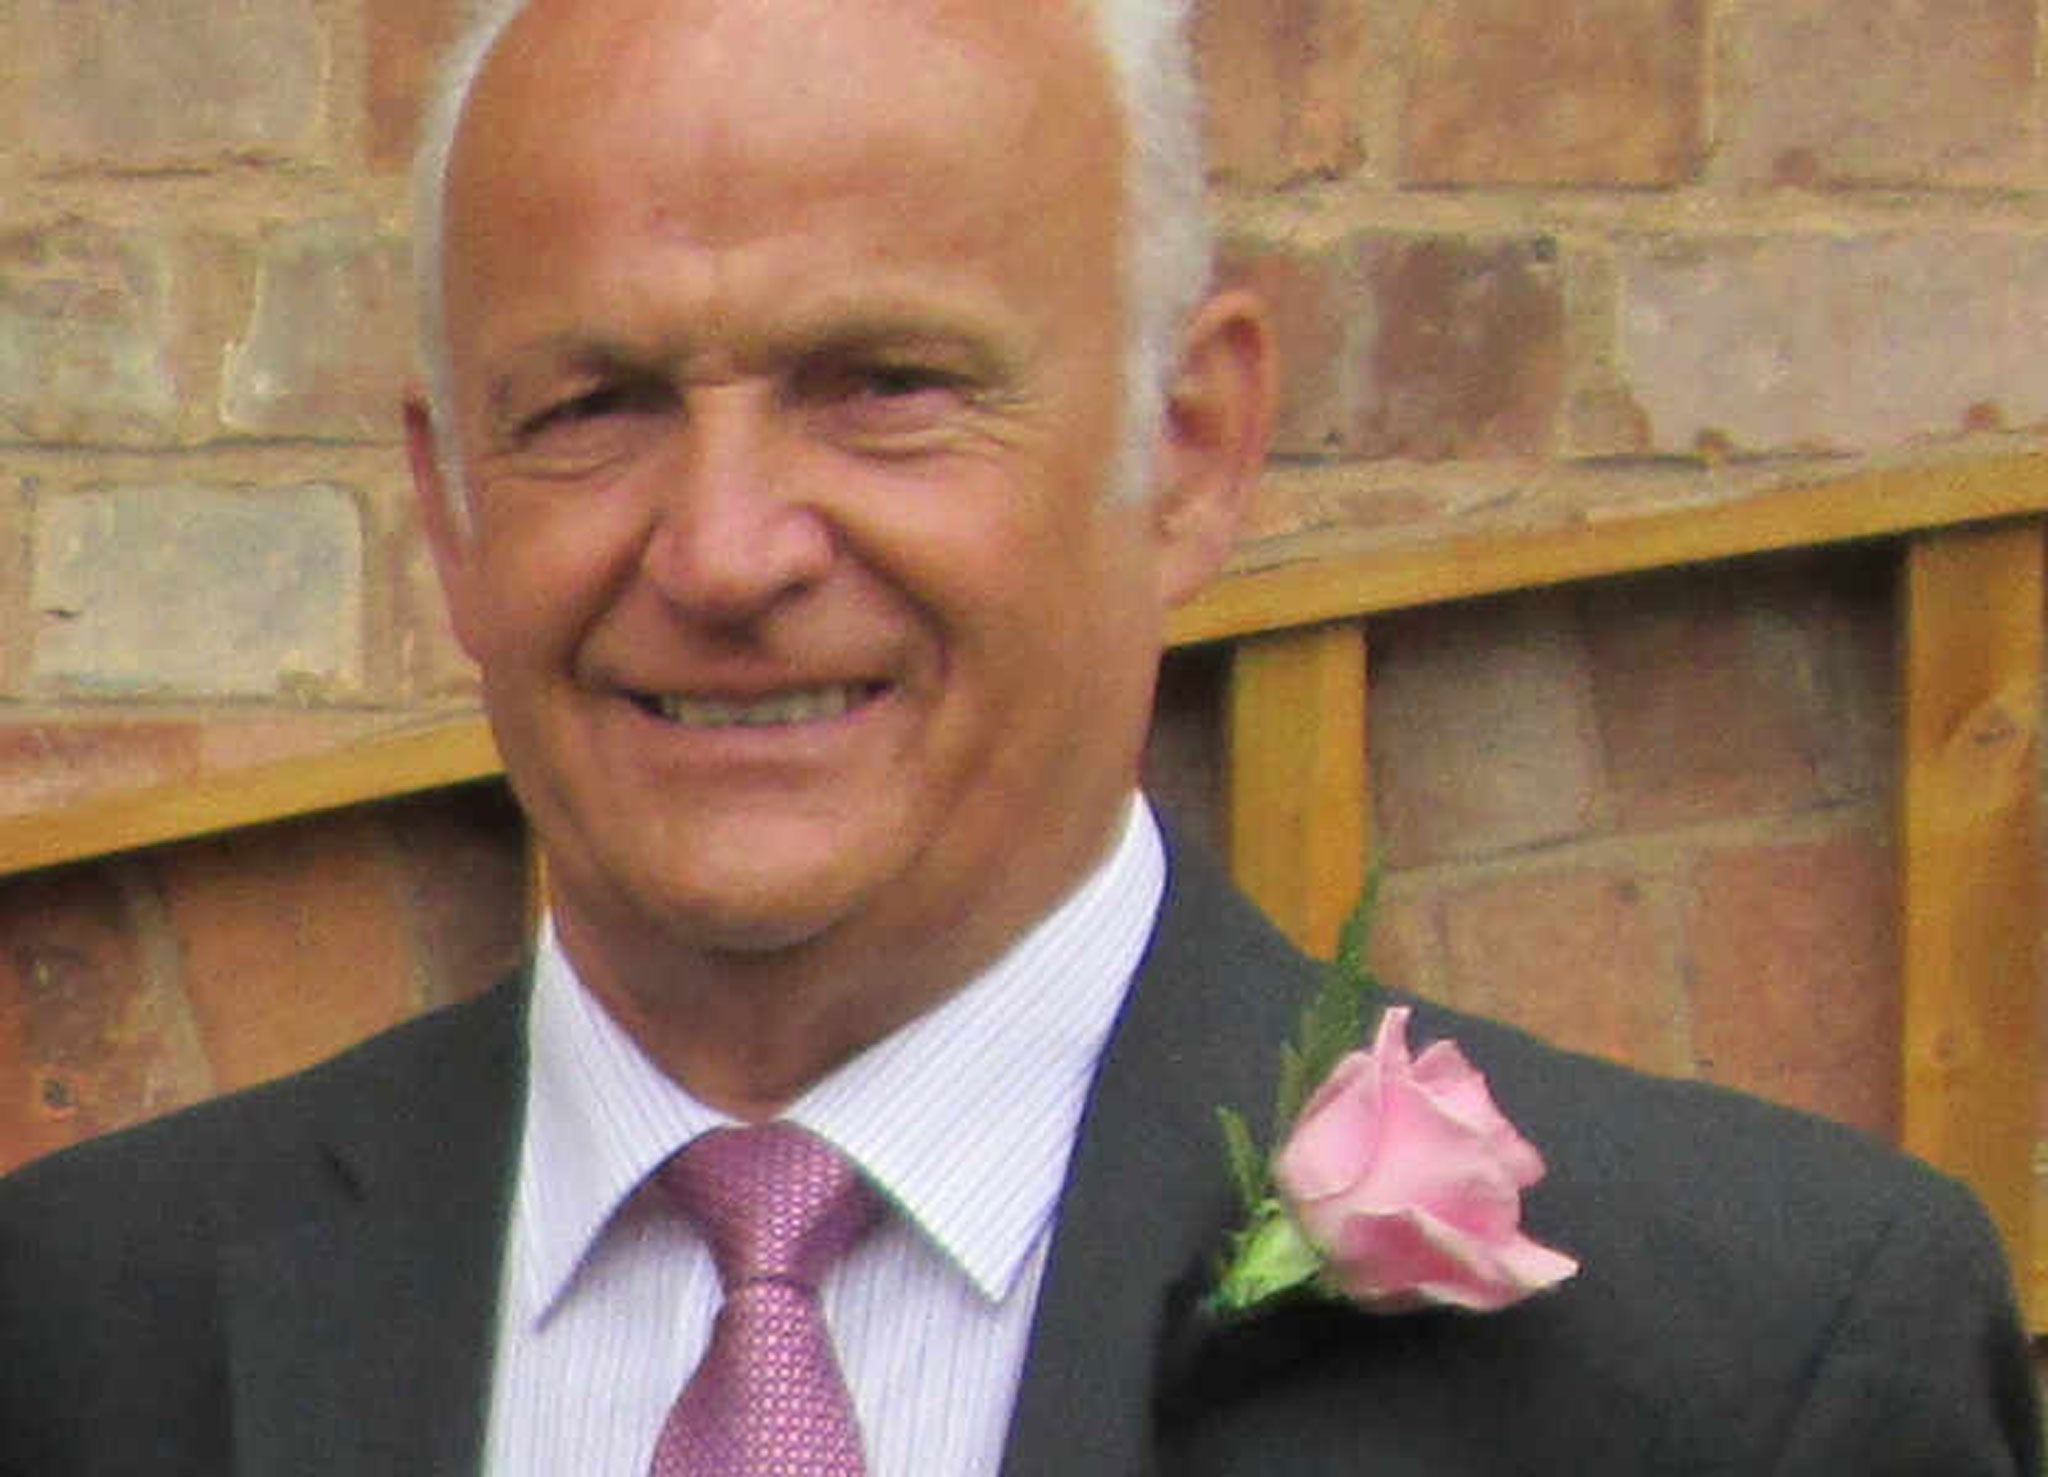 74-year-old George Searle, who was pronounced dead on the city's Stafford Road in July